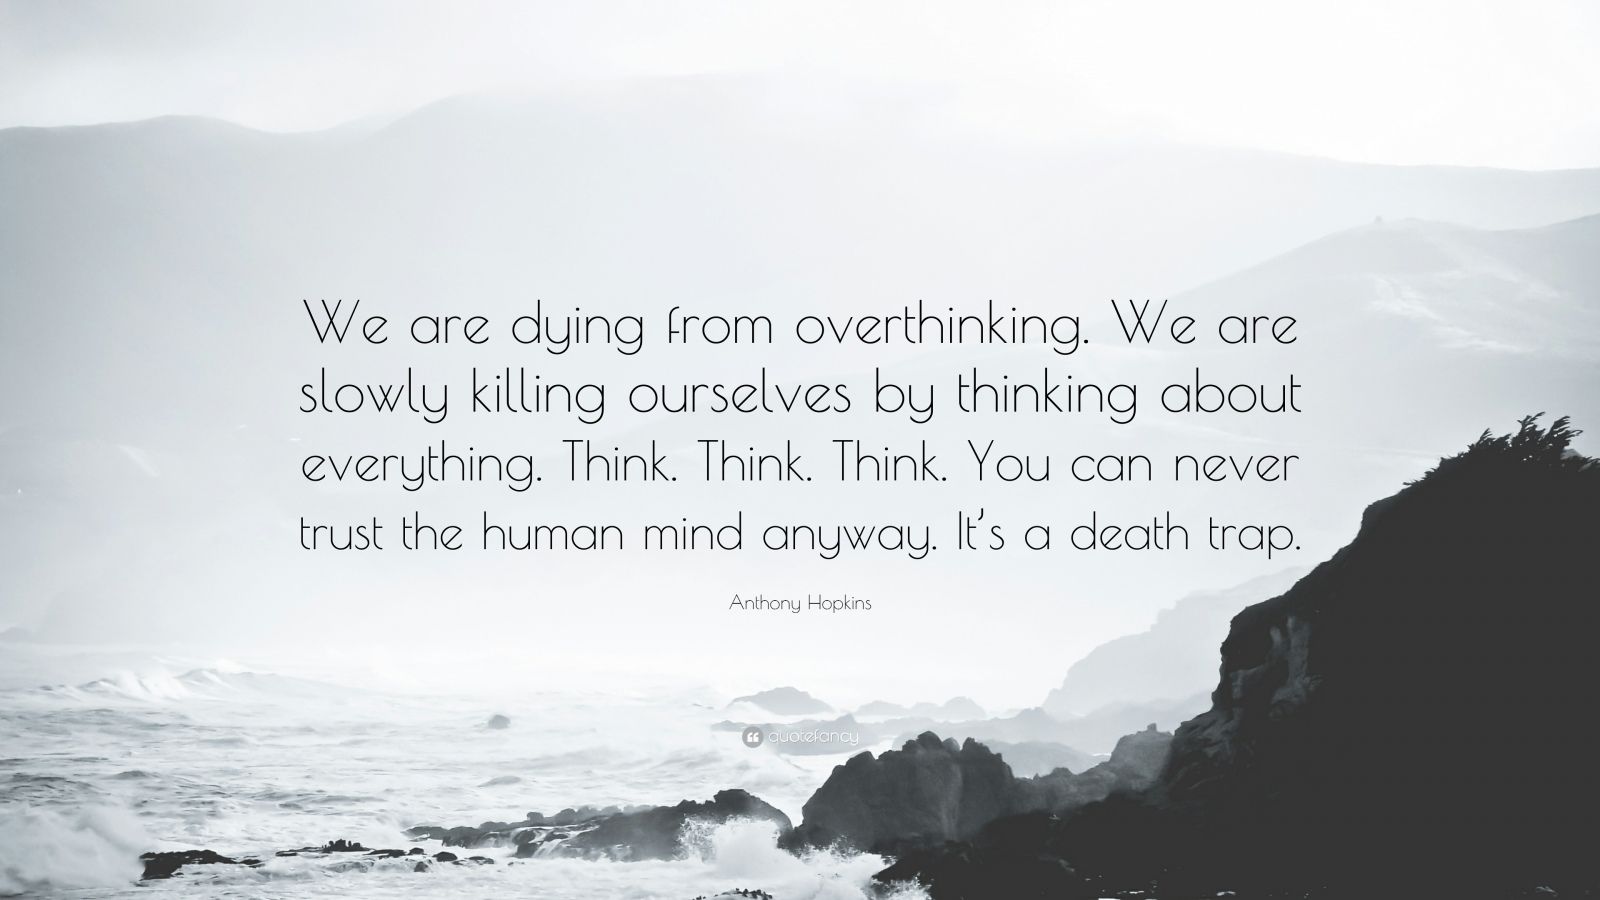 Anthony Hopkins Quote: “We are dying from overthinking. We are slowly killing ourselves by thinking about everything. Think. Think. Think. You c.” (24 wallpaper)